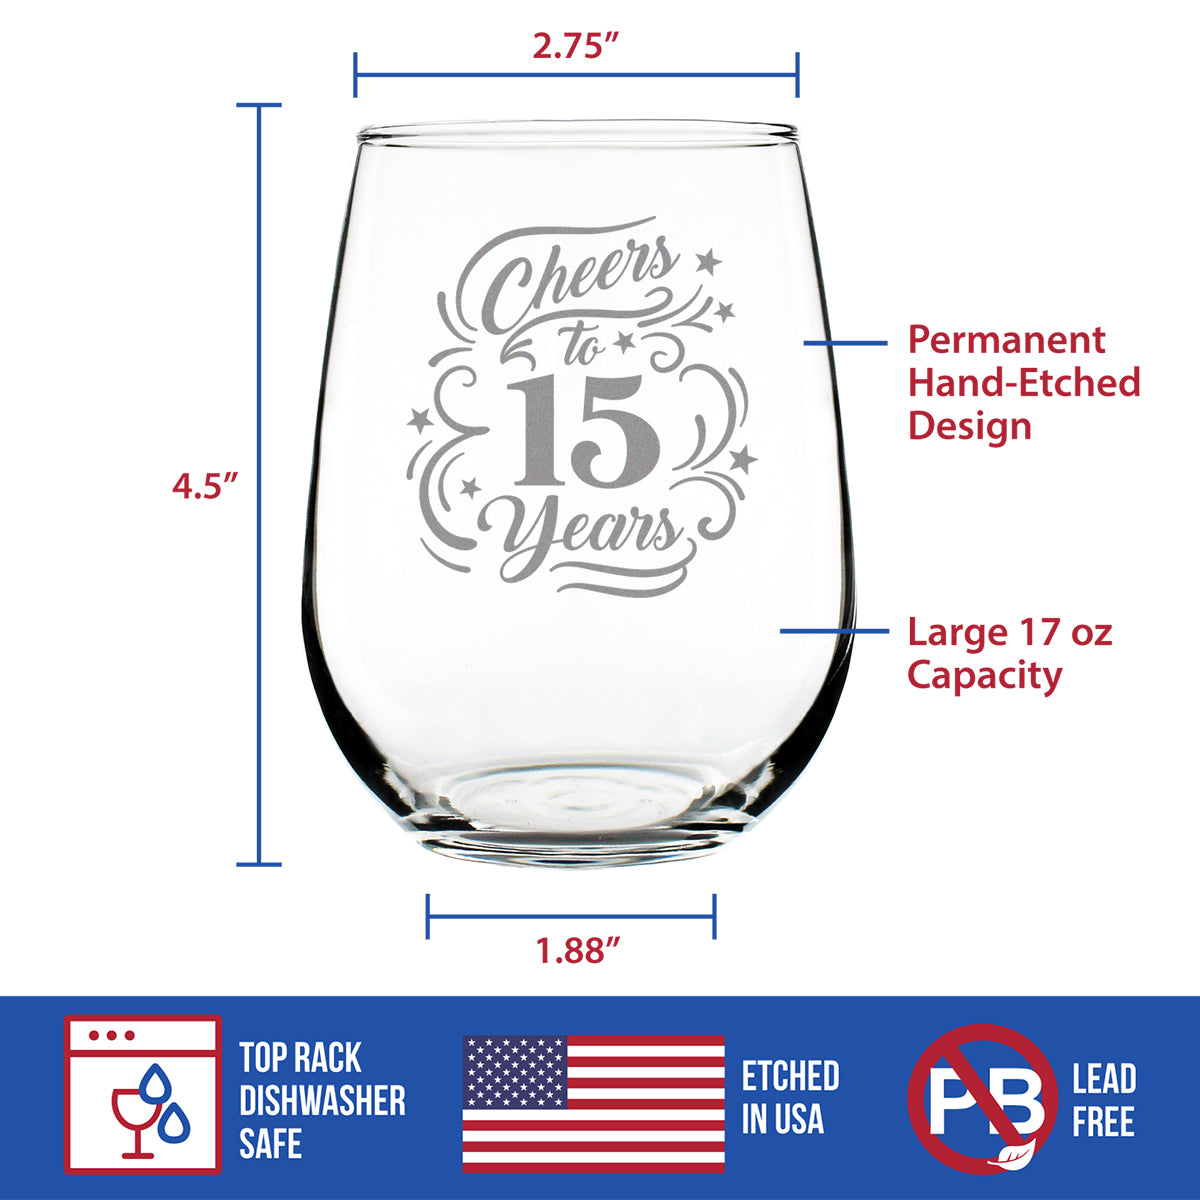 Cheers to 15 Years - Stemless Wine Glass Gifts for Women &amp; Men - 15th Anniversary Party Decor - Large 17 Oz Glasses